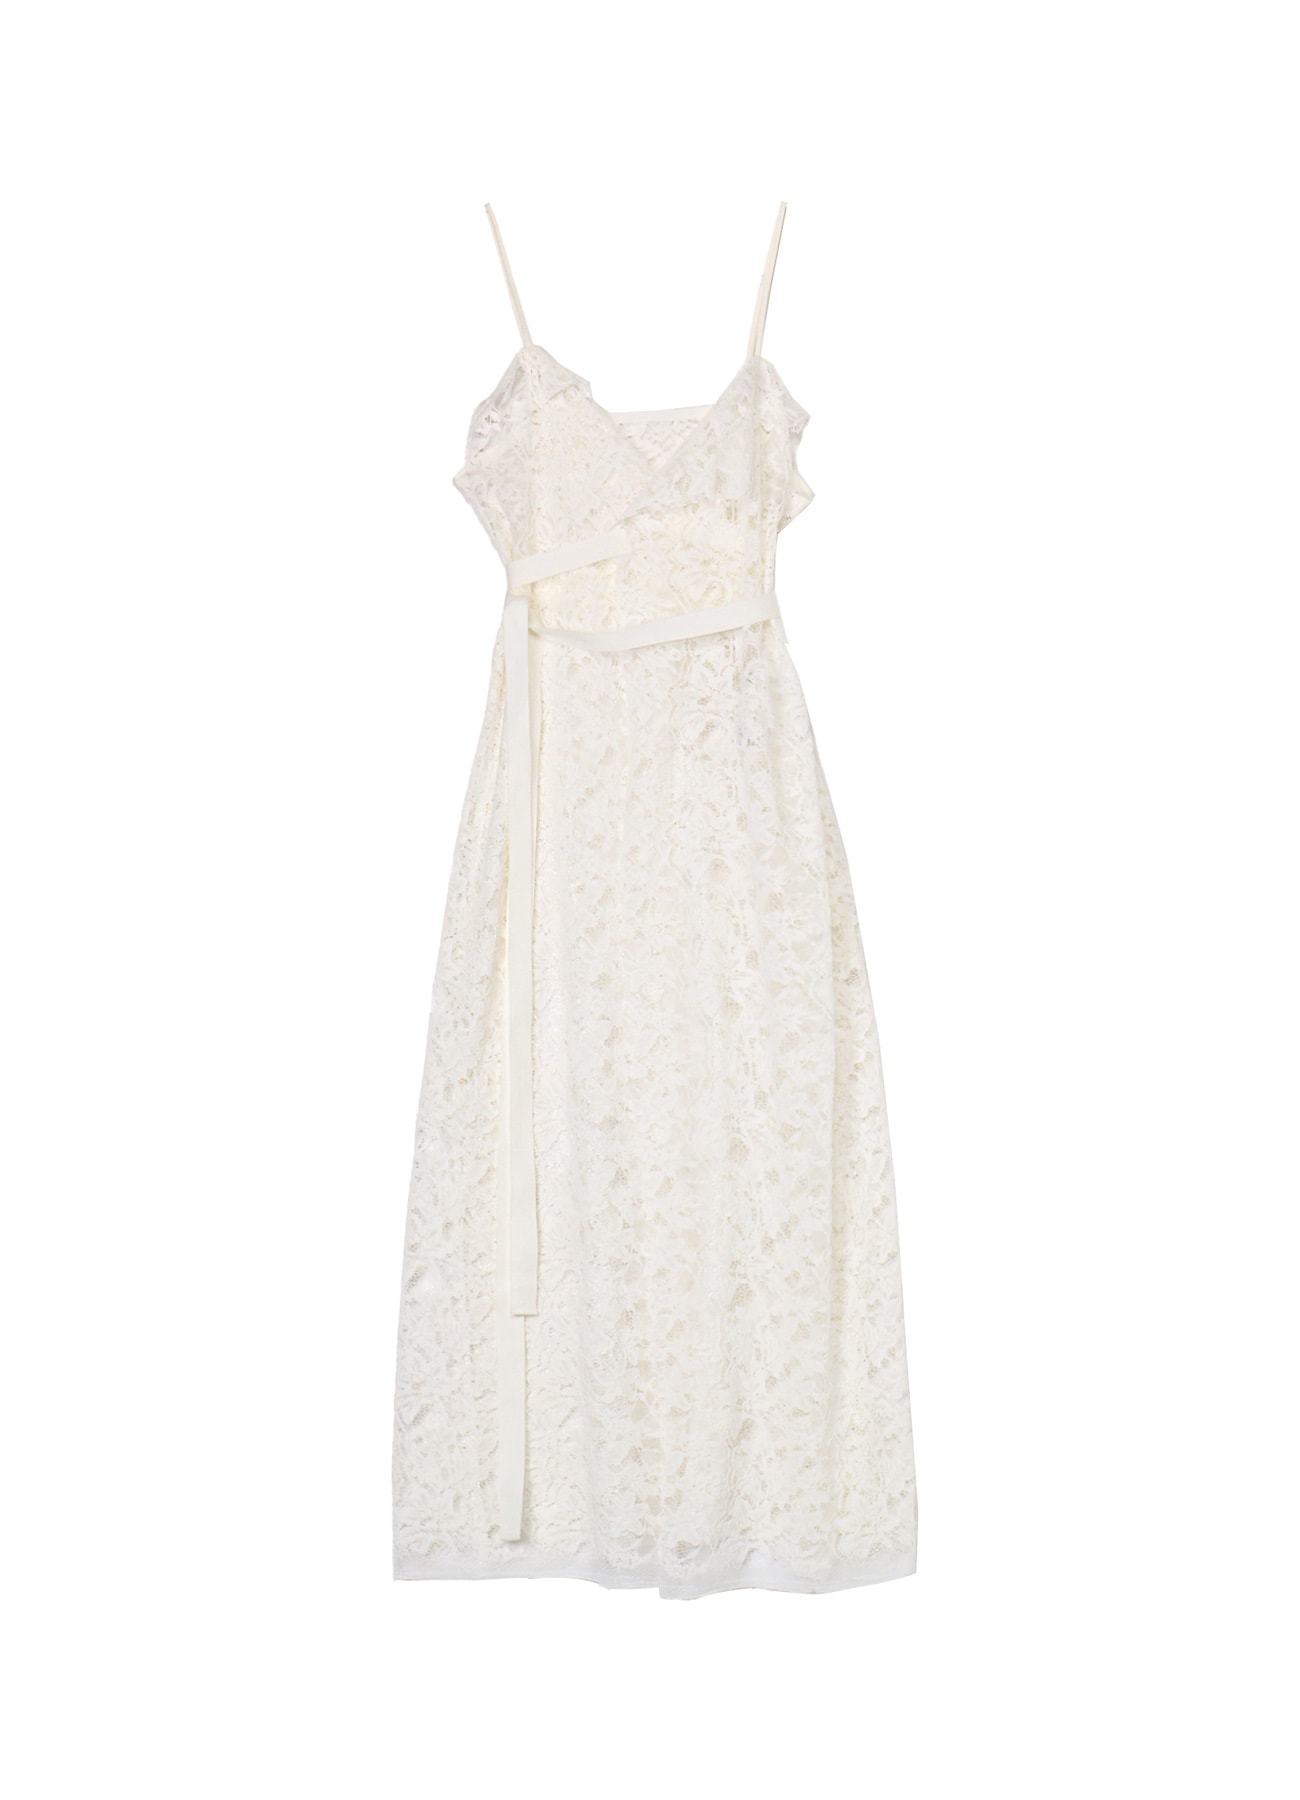 【7/17 12:00 Release】LACE CAMISOLE DRESS